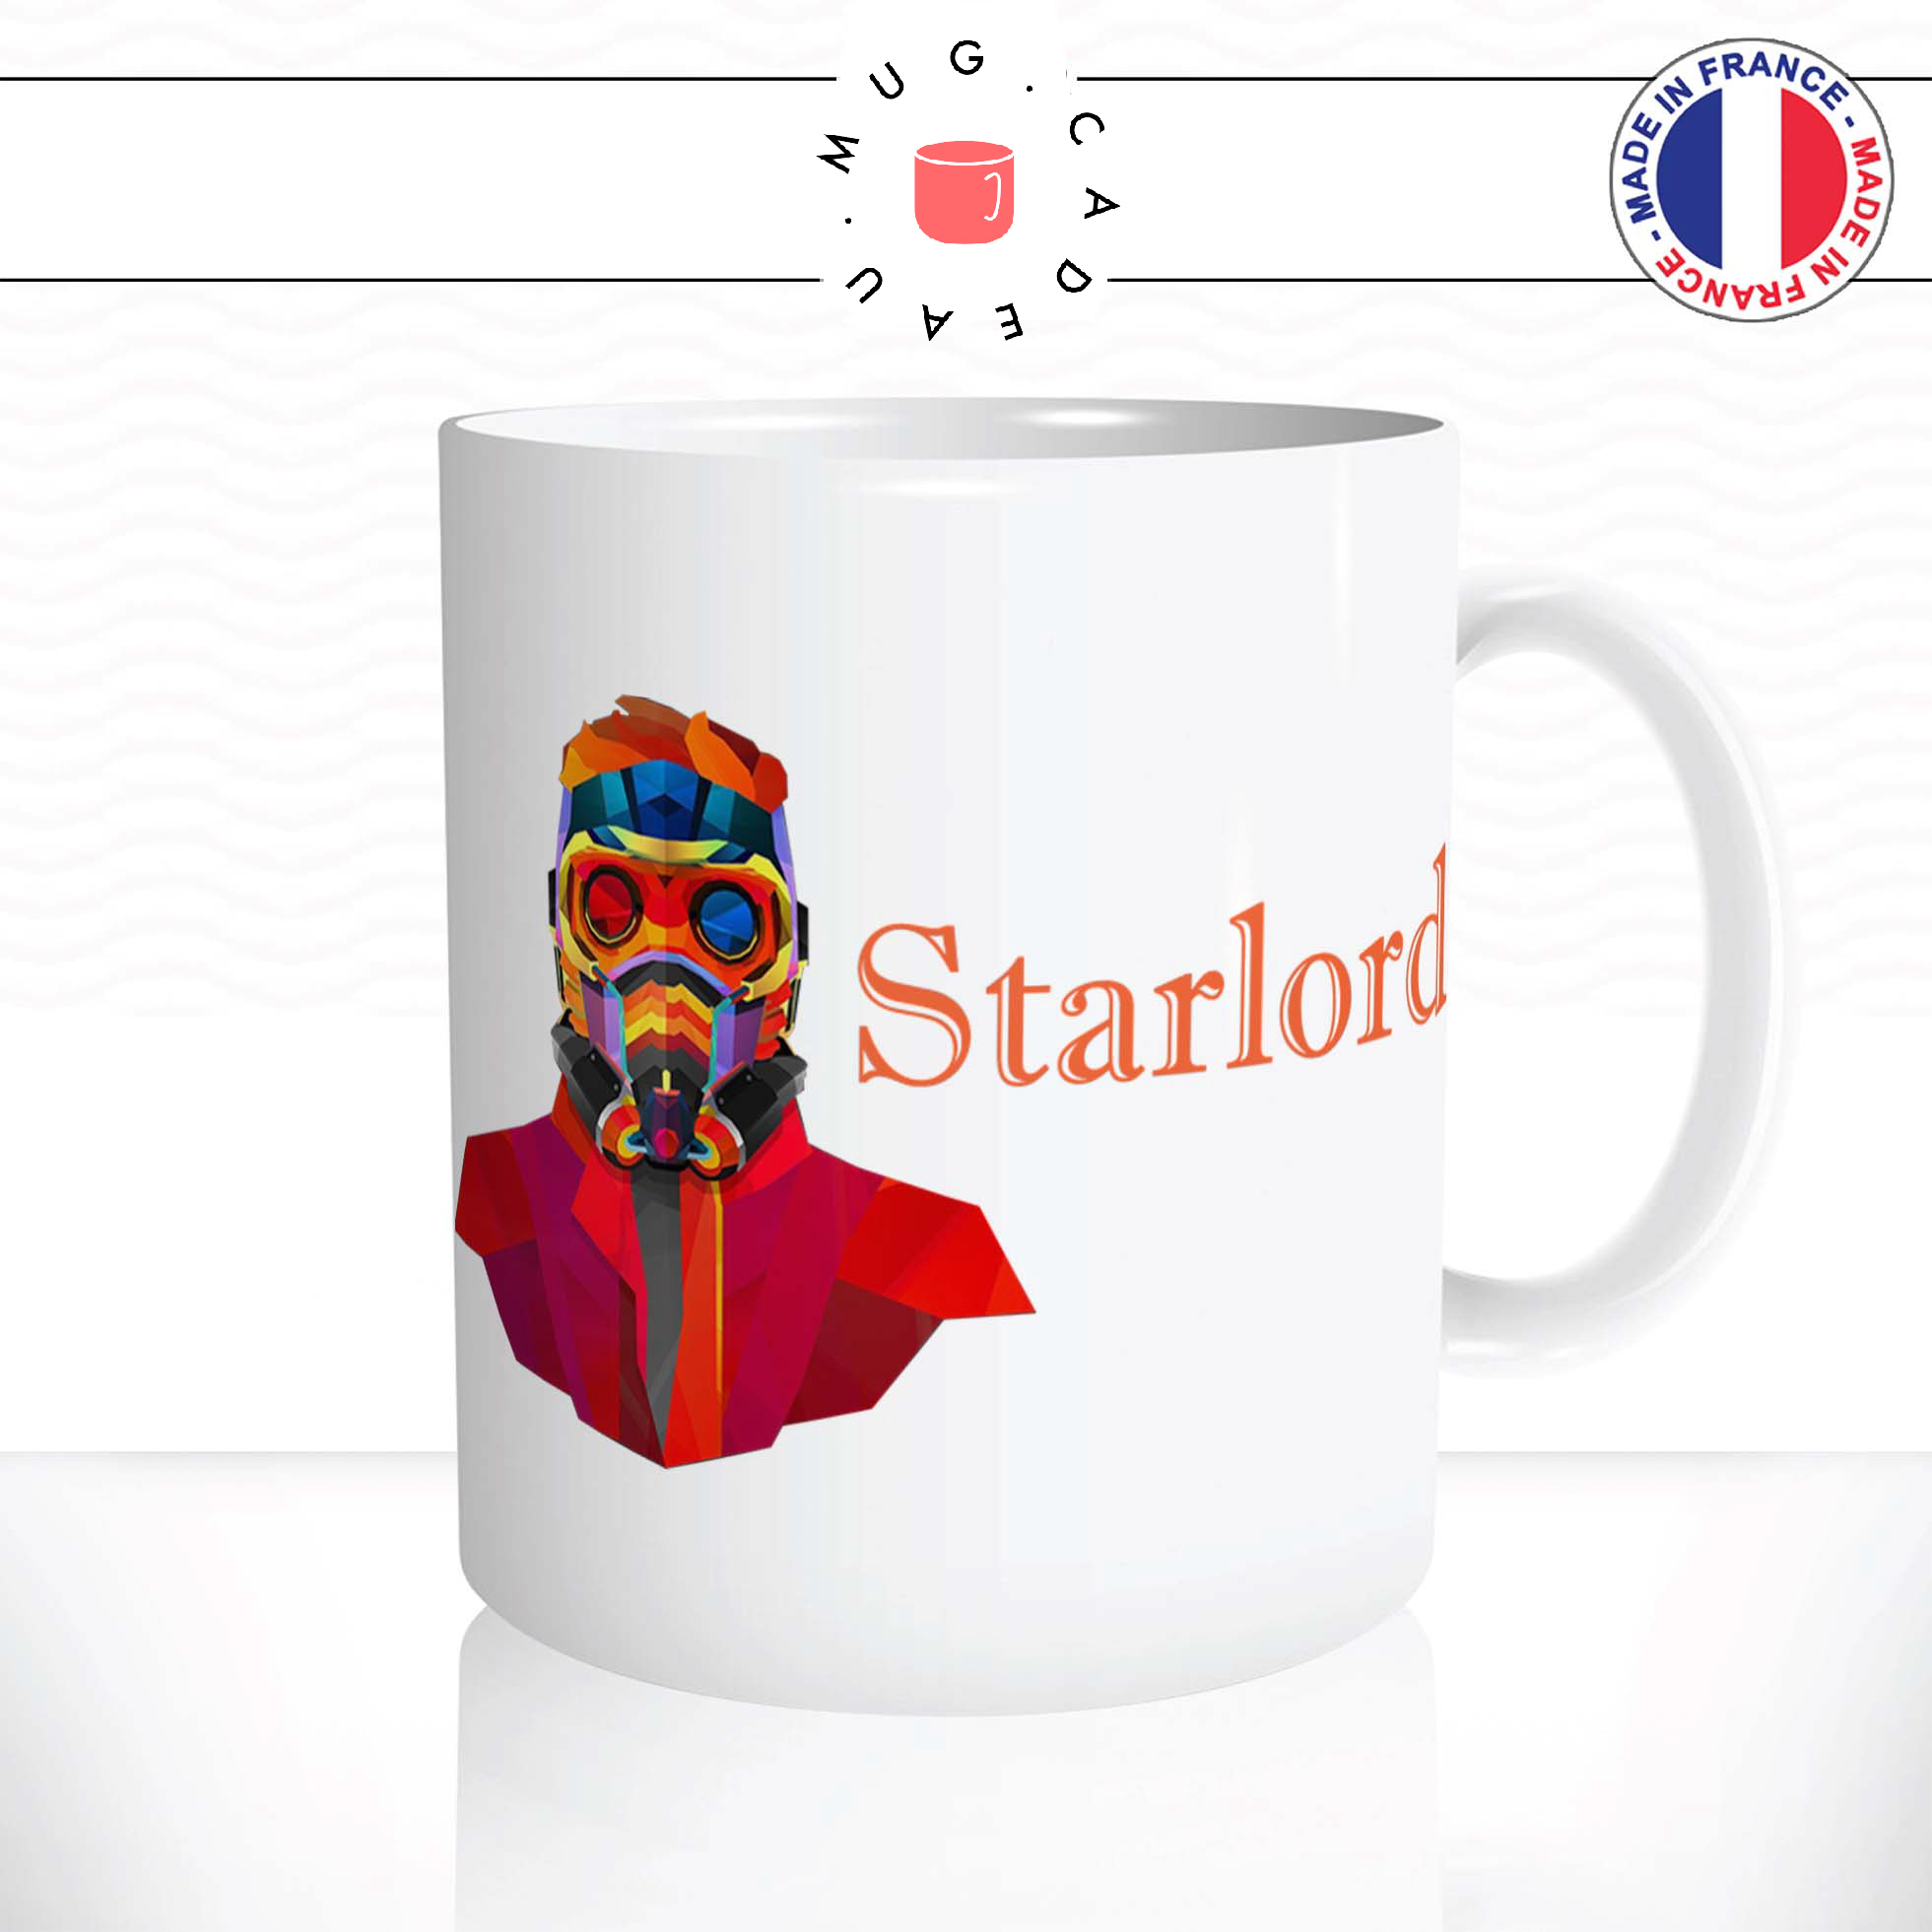 mug-tasse-ref2-film-serie-gardiens-galaxie-starlord-origami-personnage-cafe-the-mugs-tasses-personnalise-anse-droite